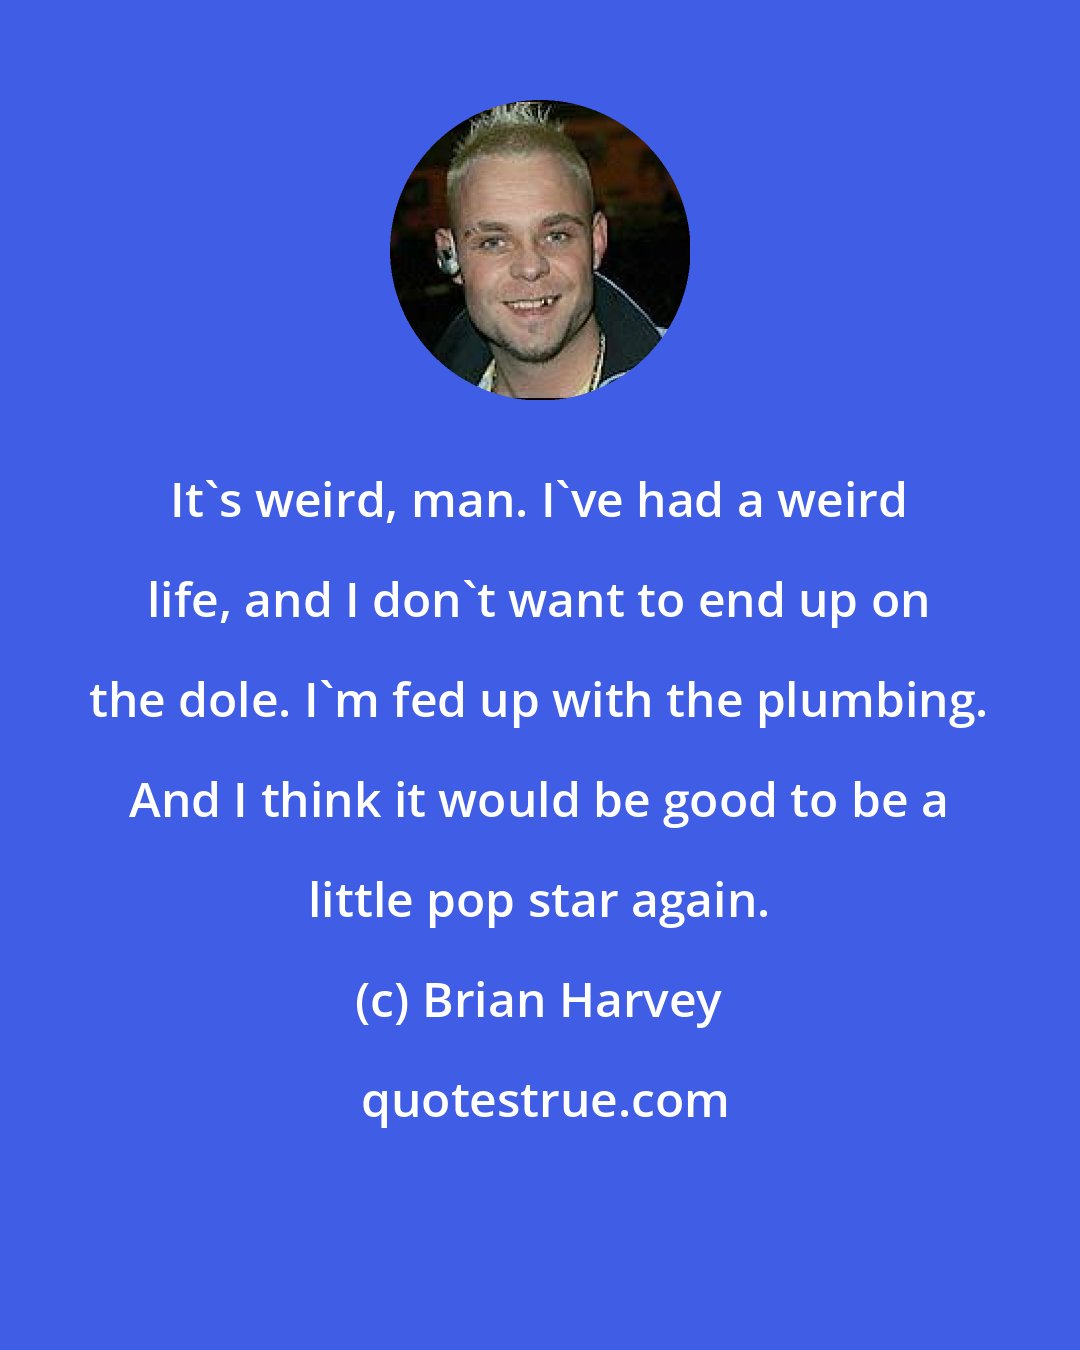 Brian Harvey: It's weird, man. I've had a weird life, and I don't want to end up on the dole. I'm fed up with the plumbing. And I think it would be good to be a little pop star again.